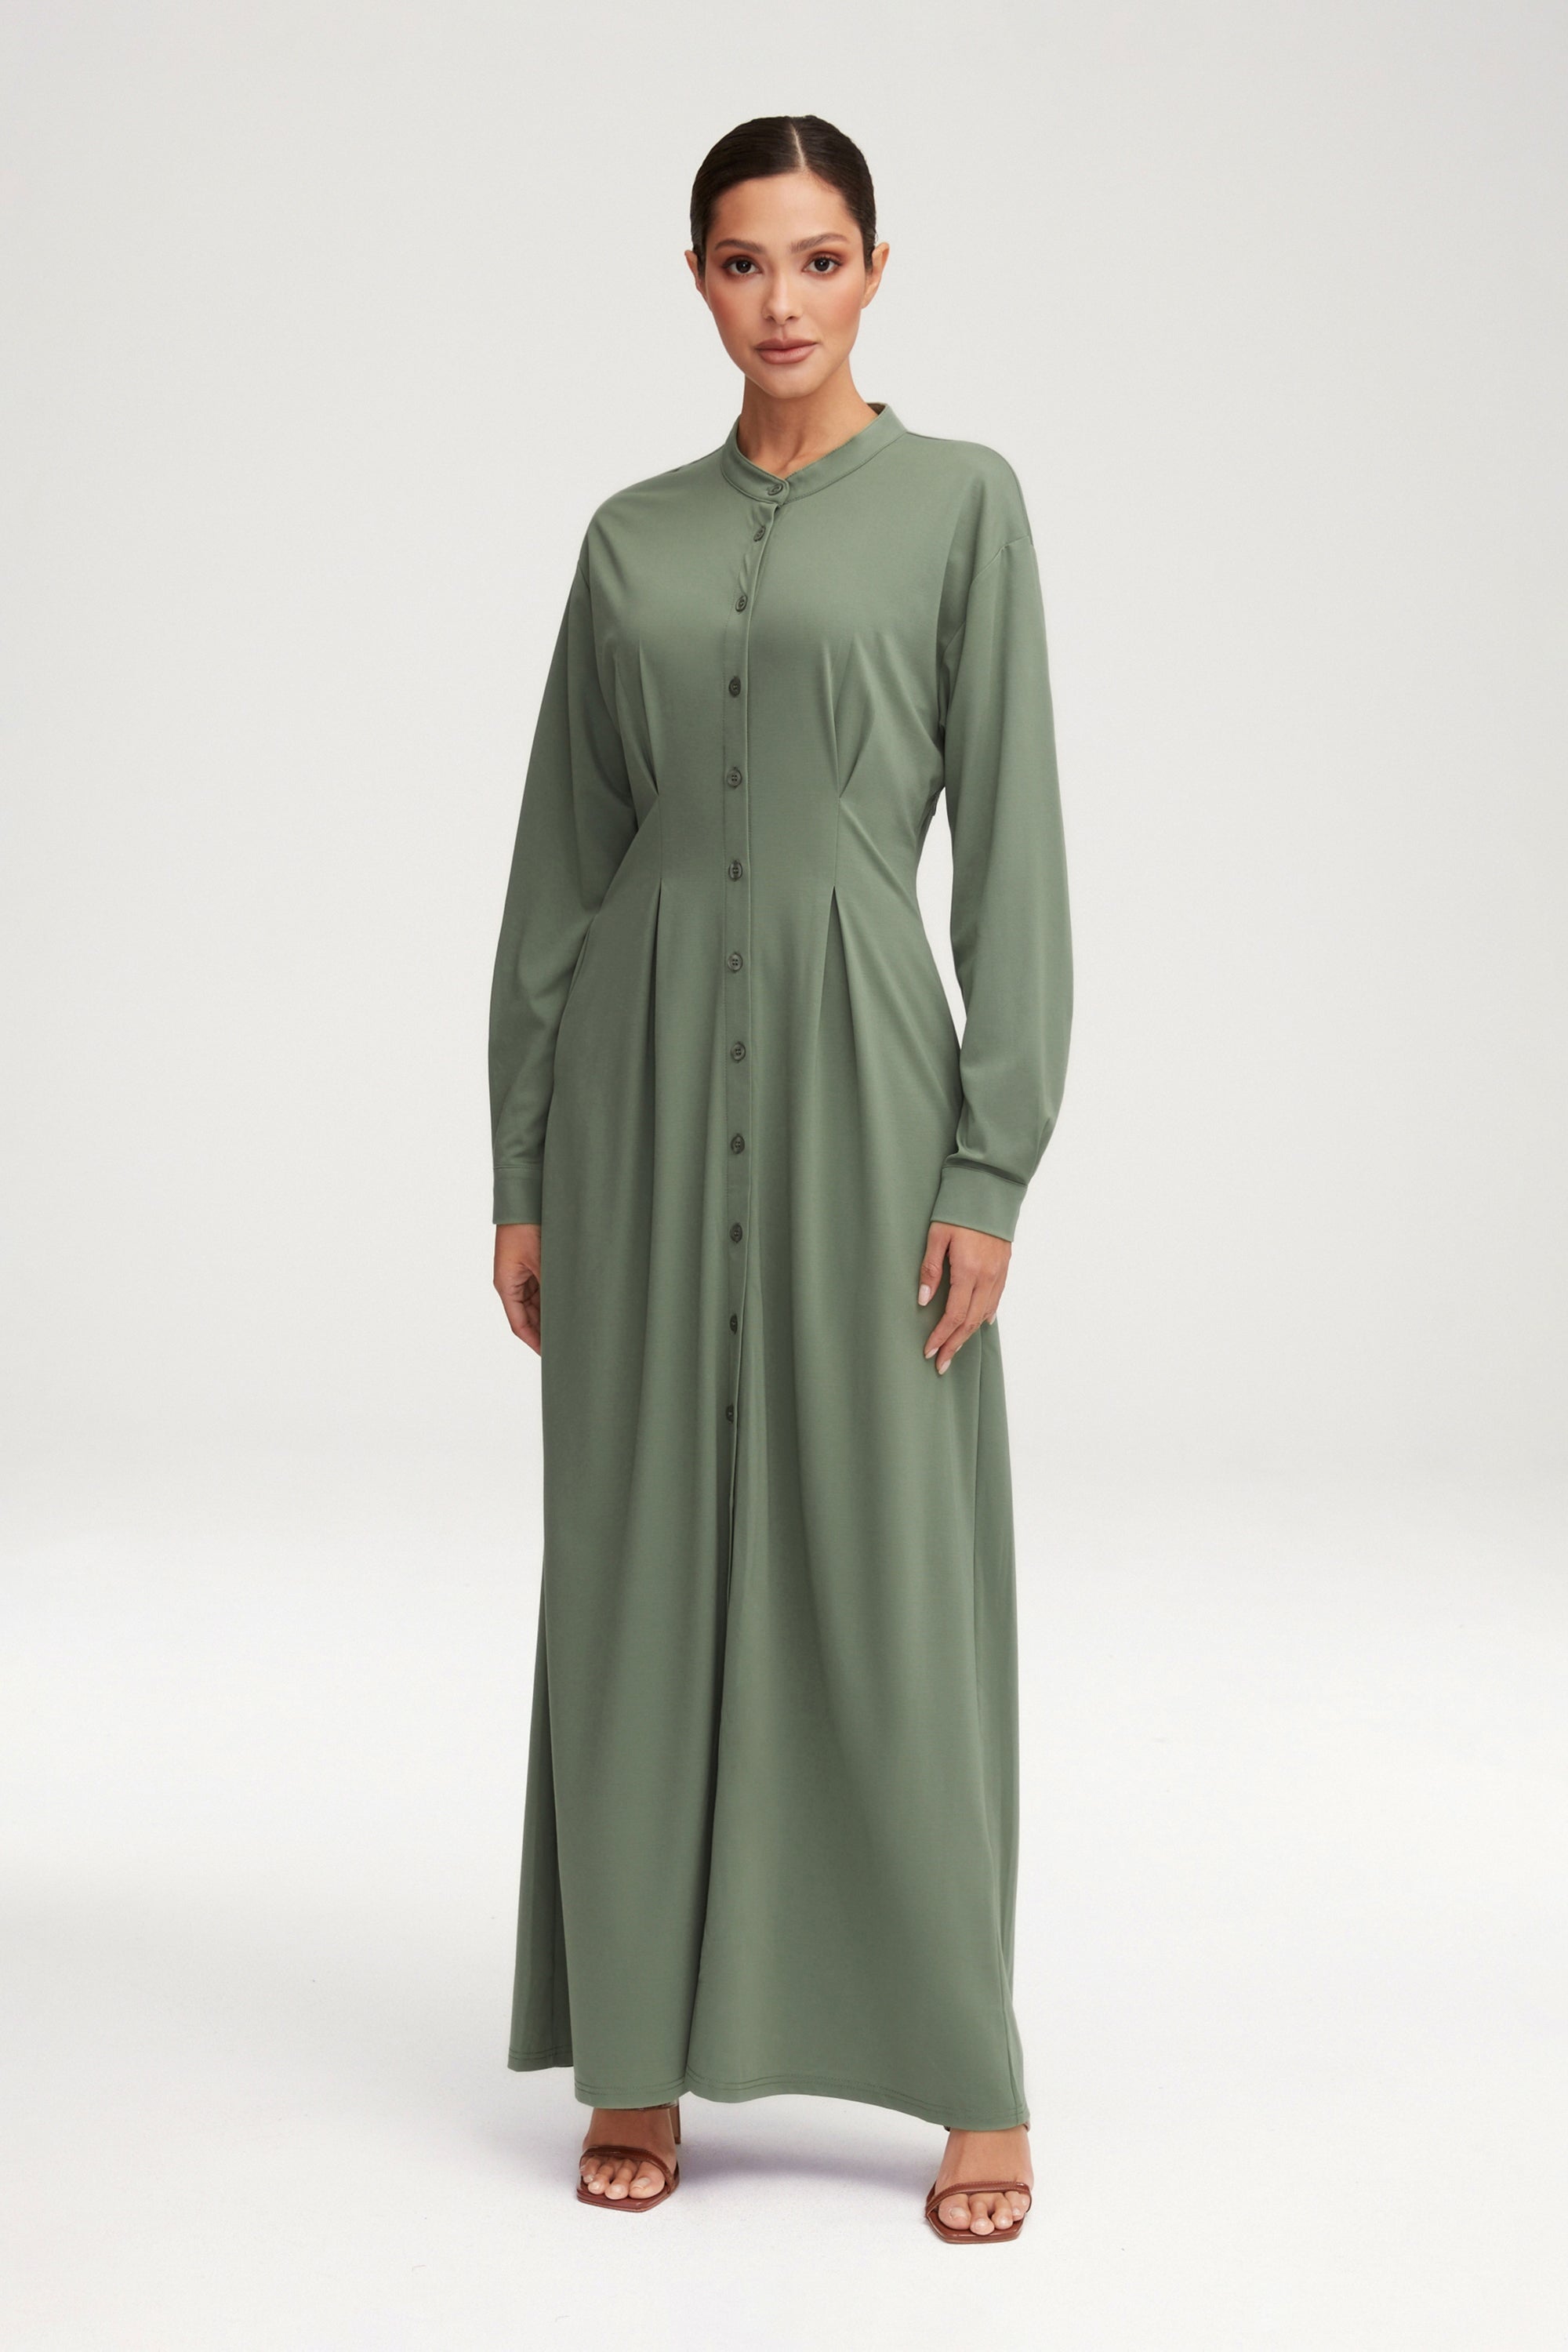 Veiled  Modest Maxi Dresses for Women – Page 3